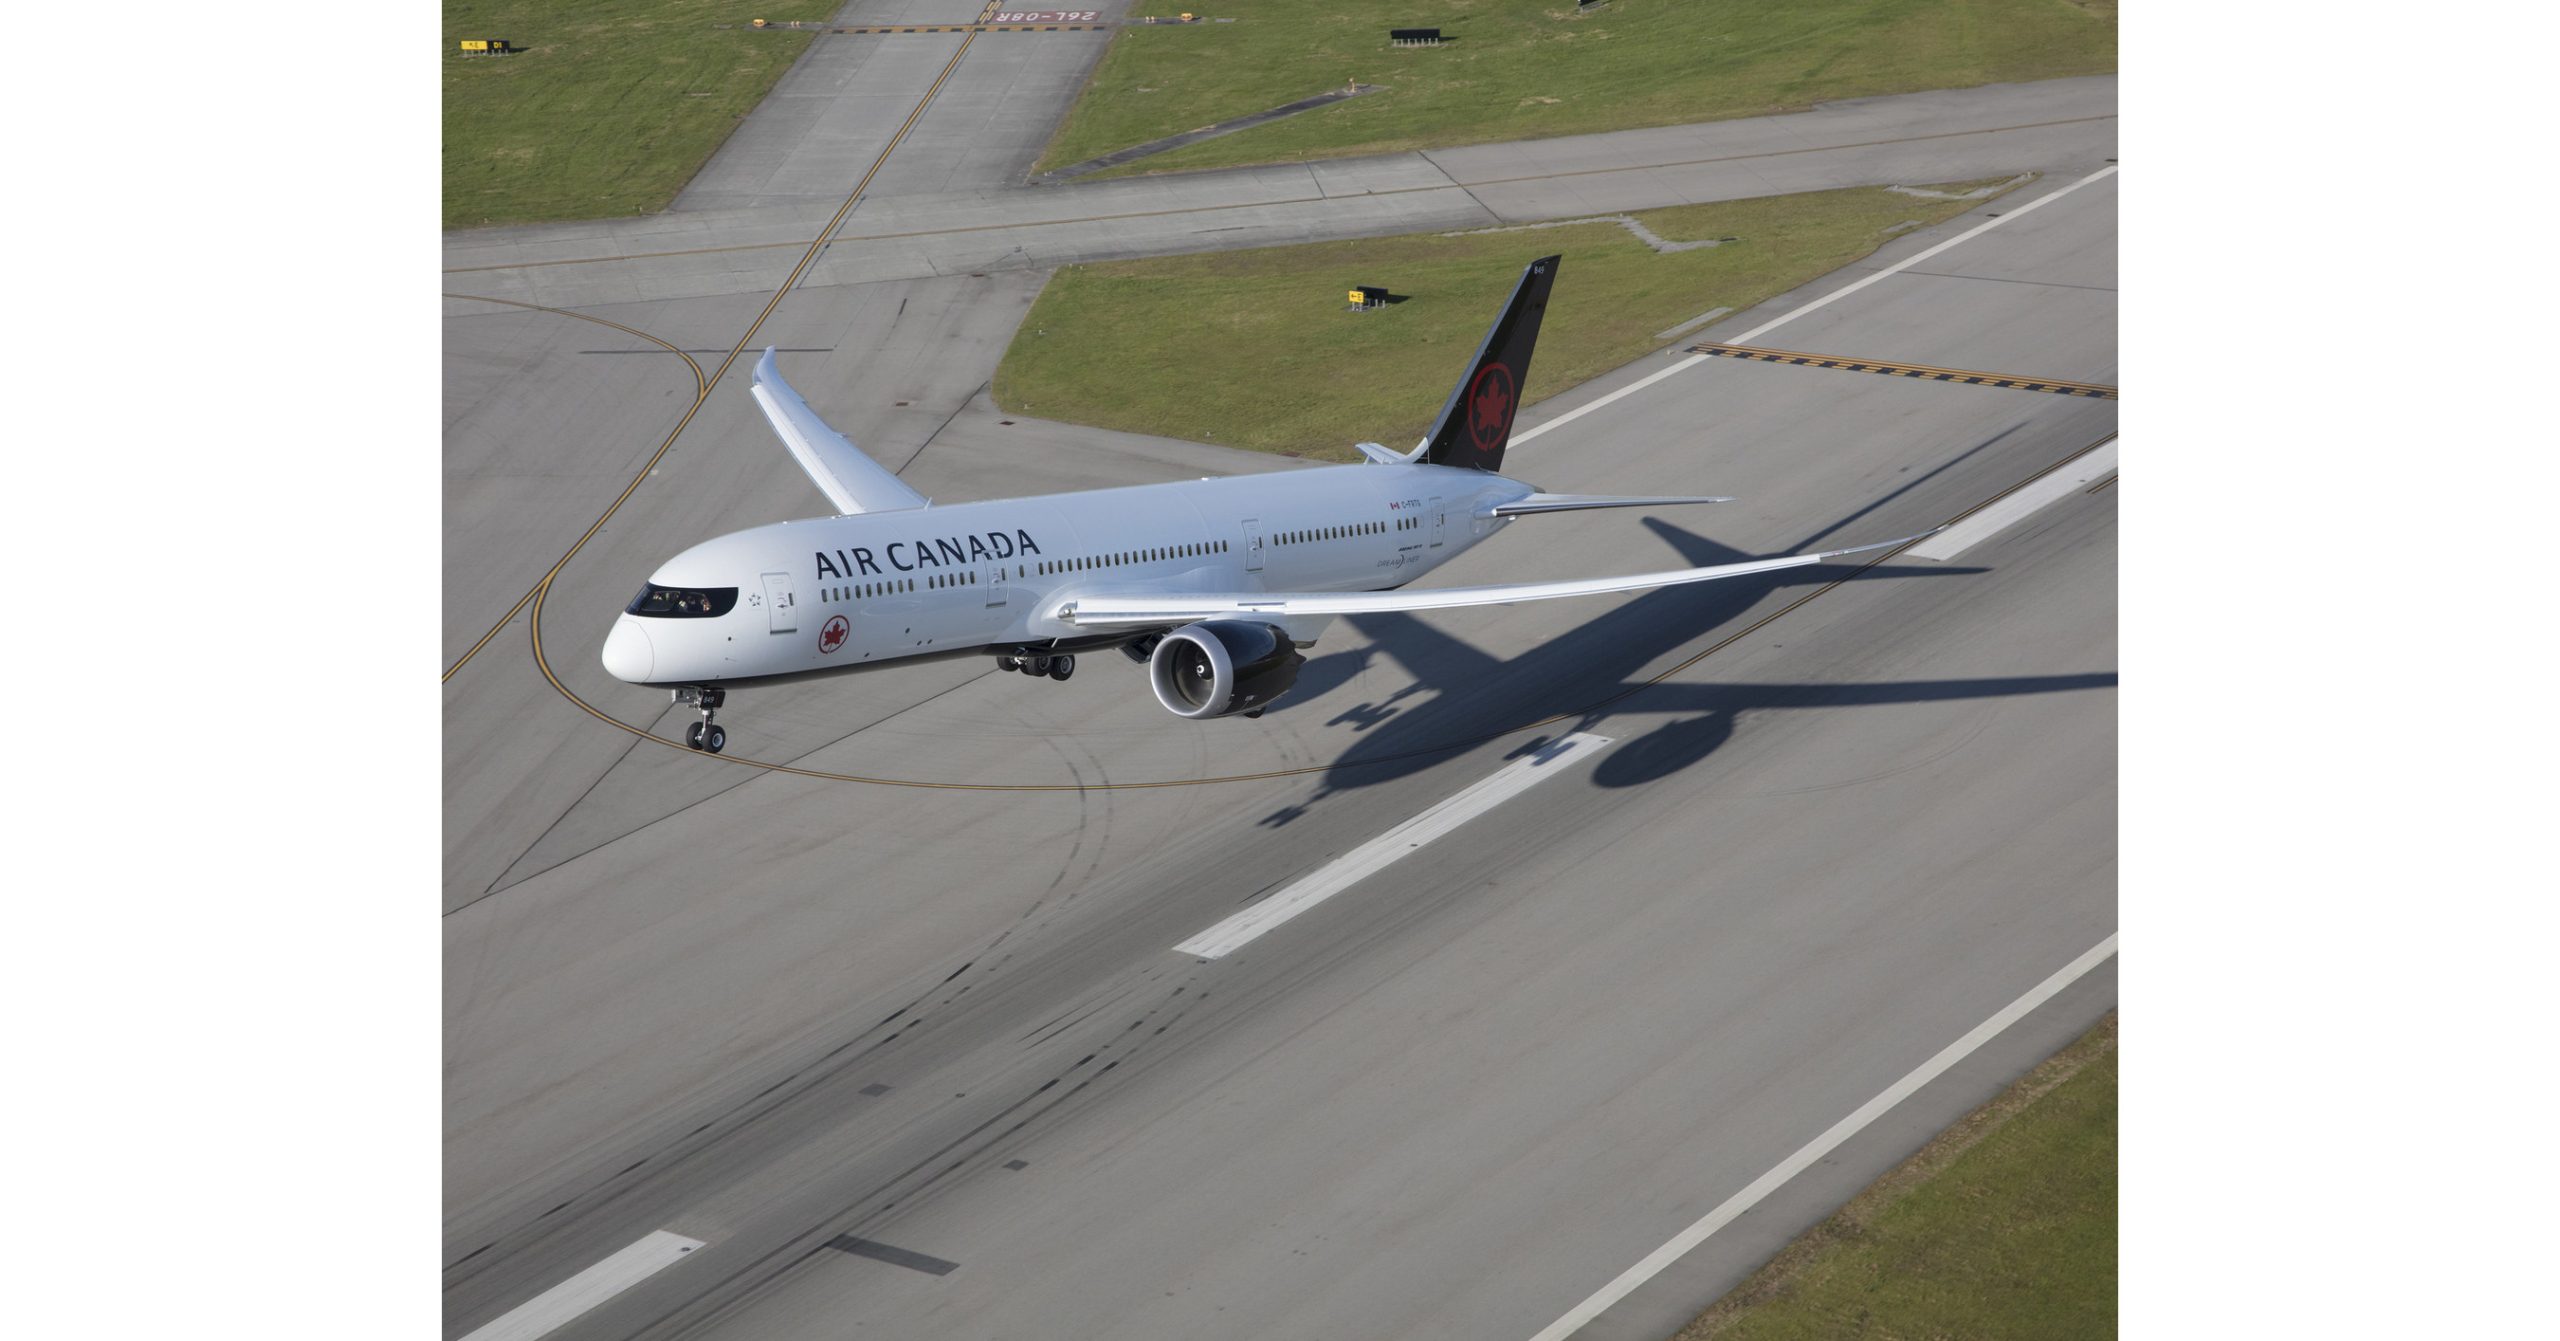 Air Canada passenger volume exceeded 100,000 in one day

